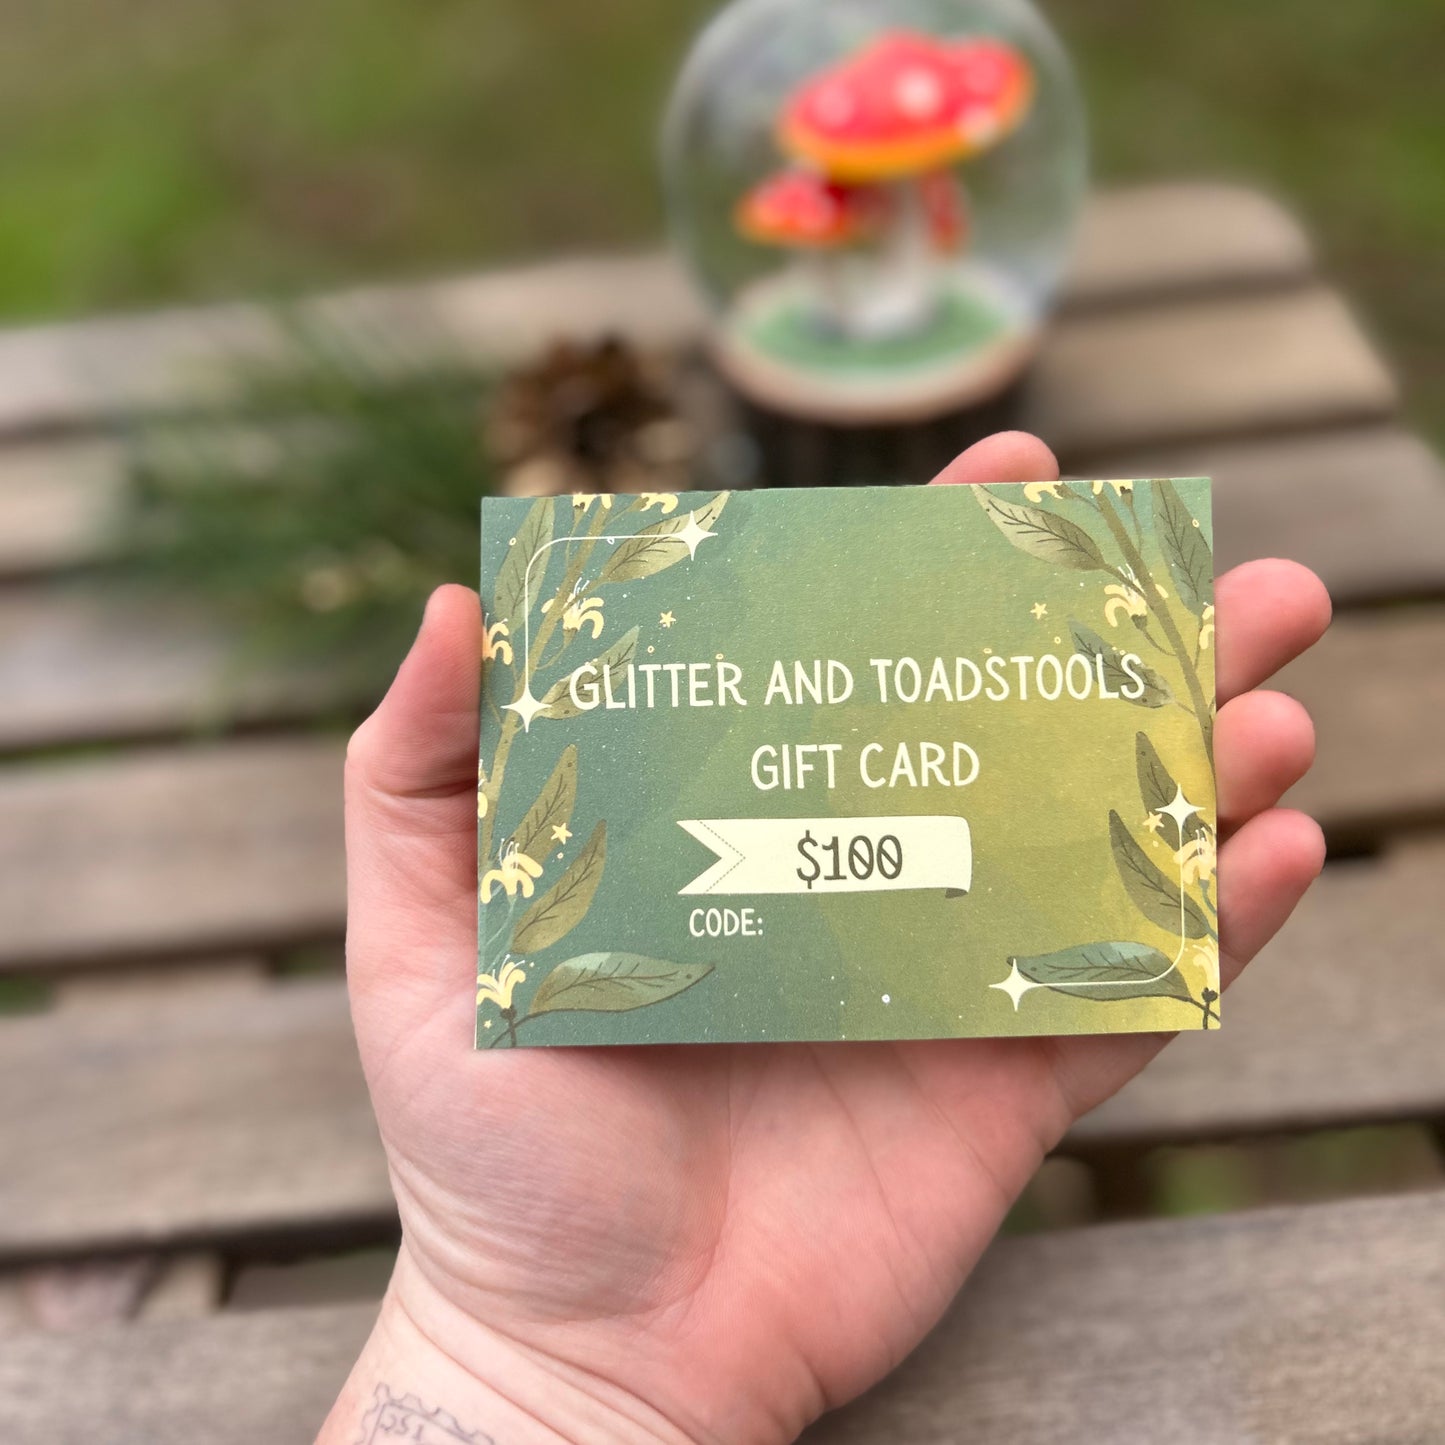 Glitter and Toadstools Giftcard